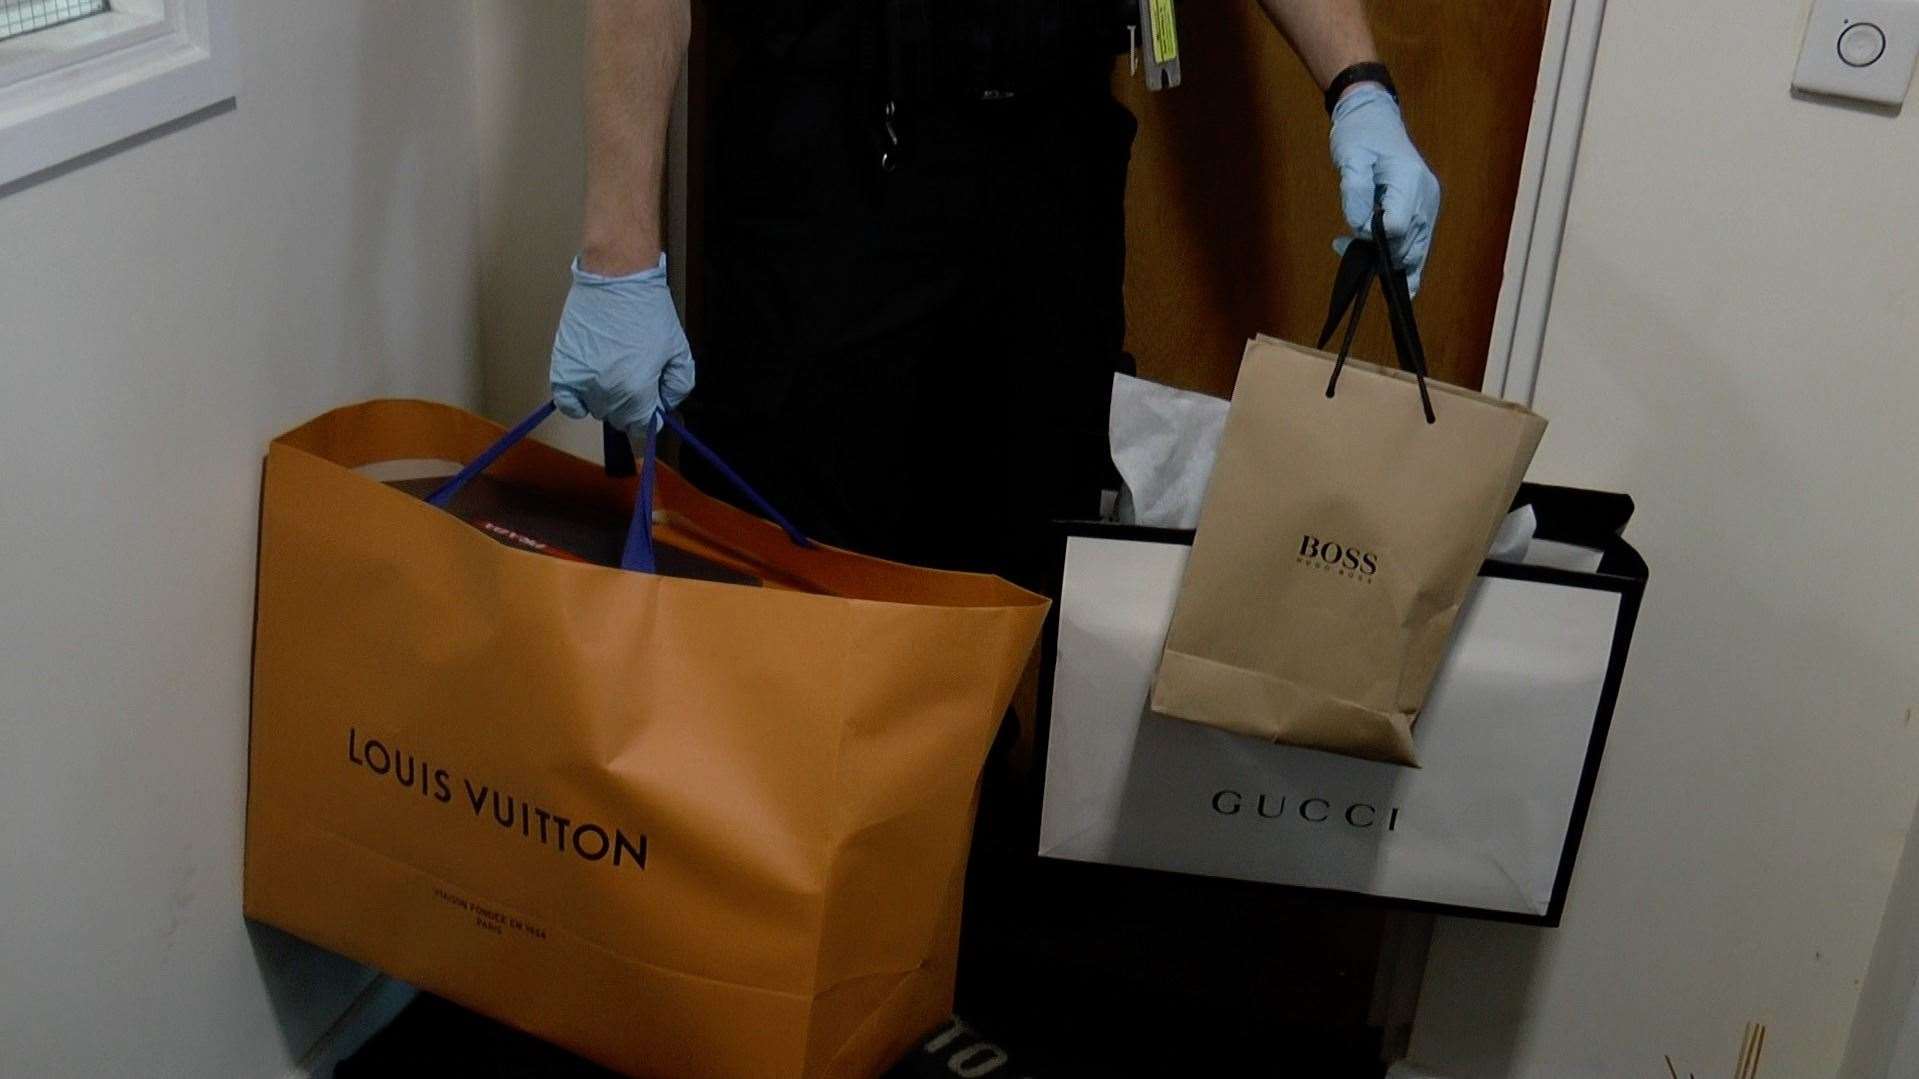 Designer bags seized from the flat in Tonbridge Road, Maidstone